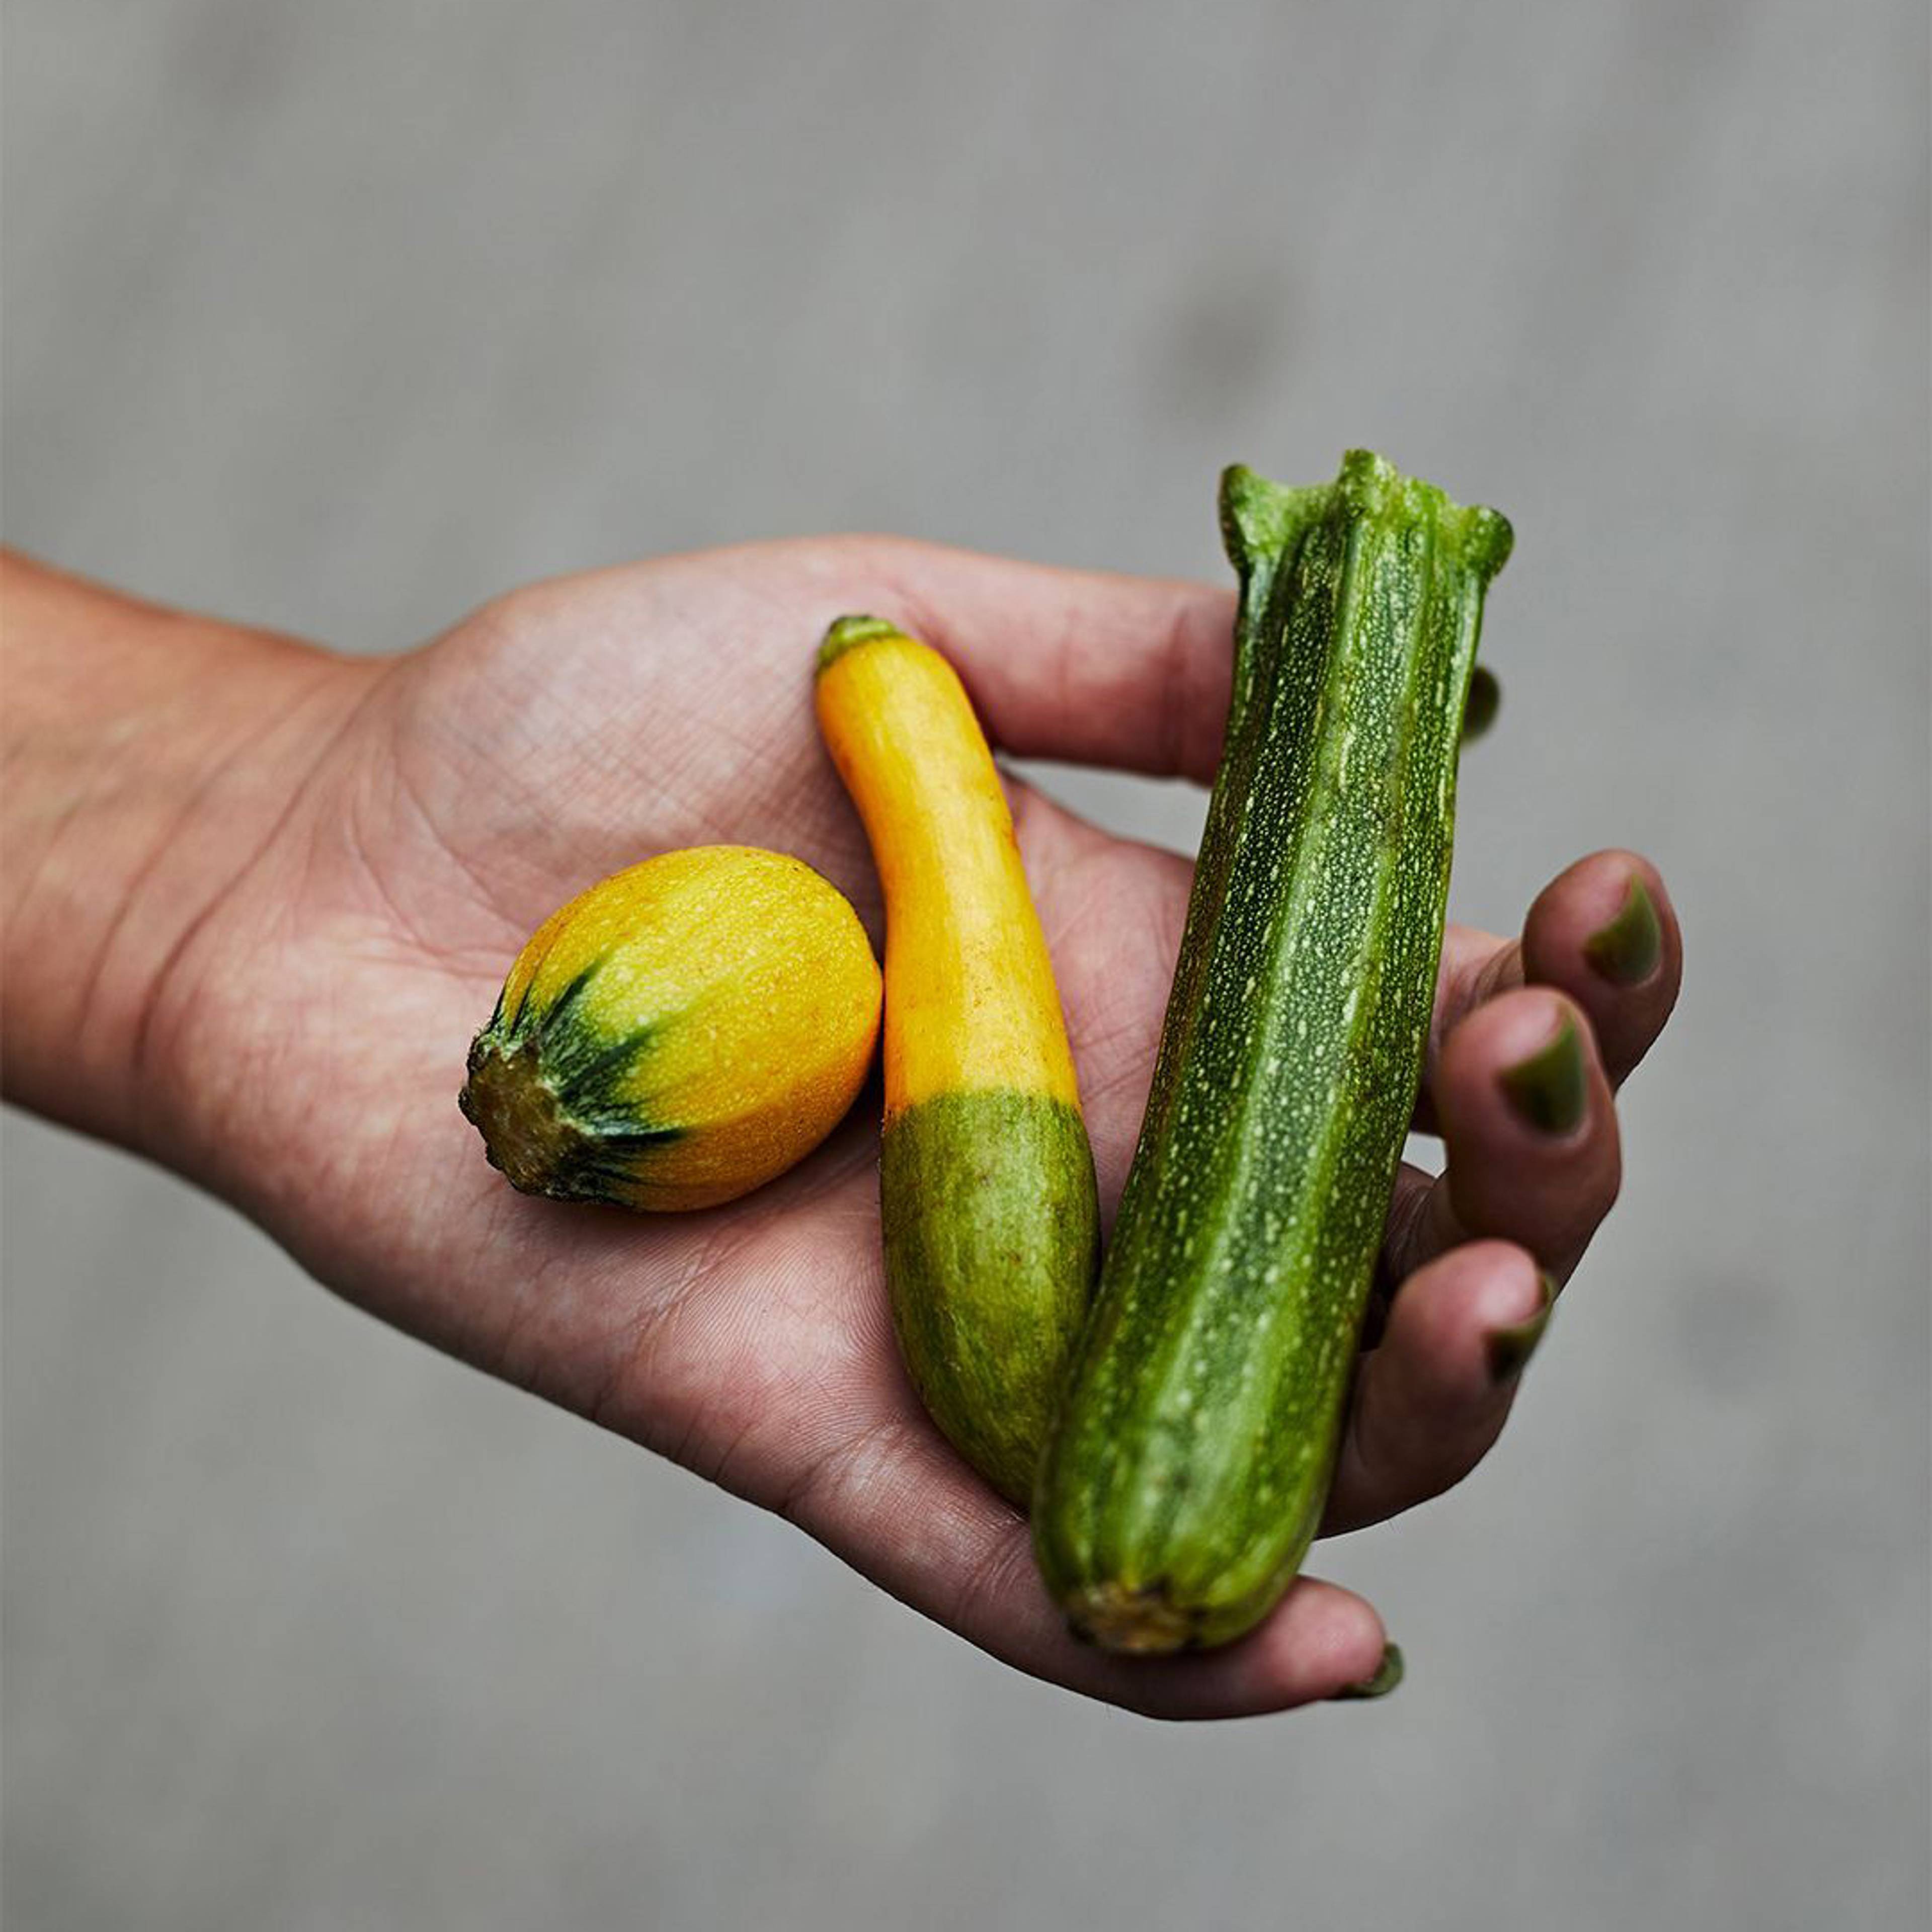 Baby courgettes in a hand